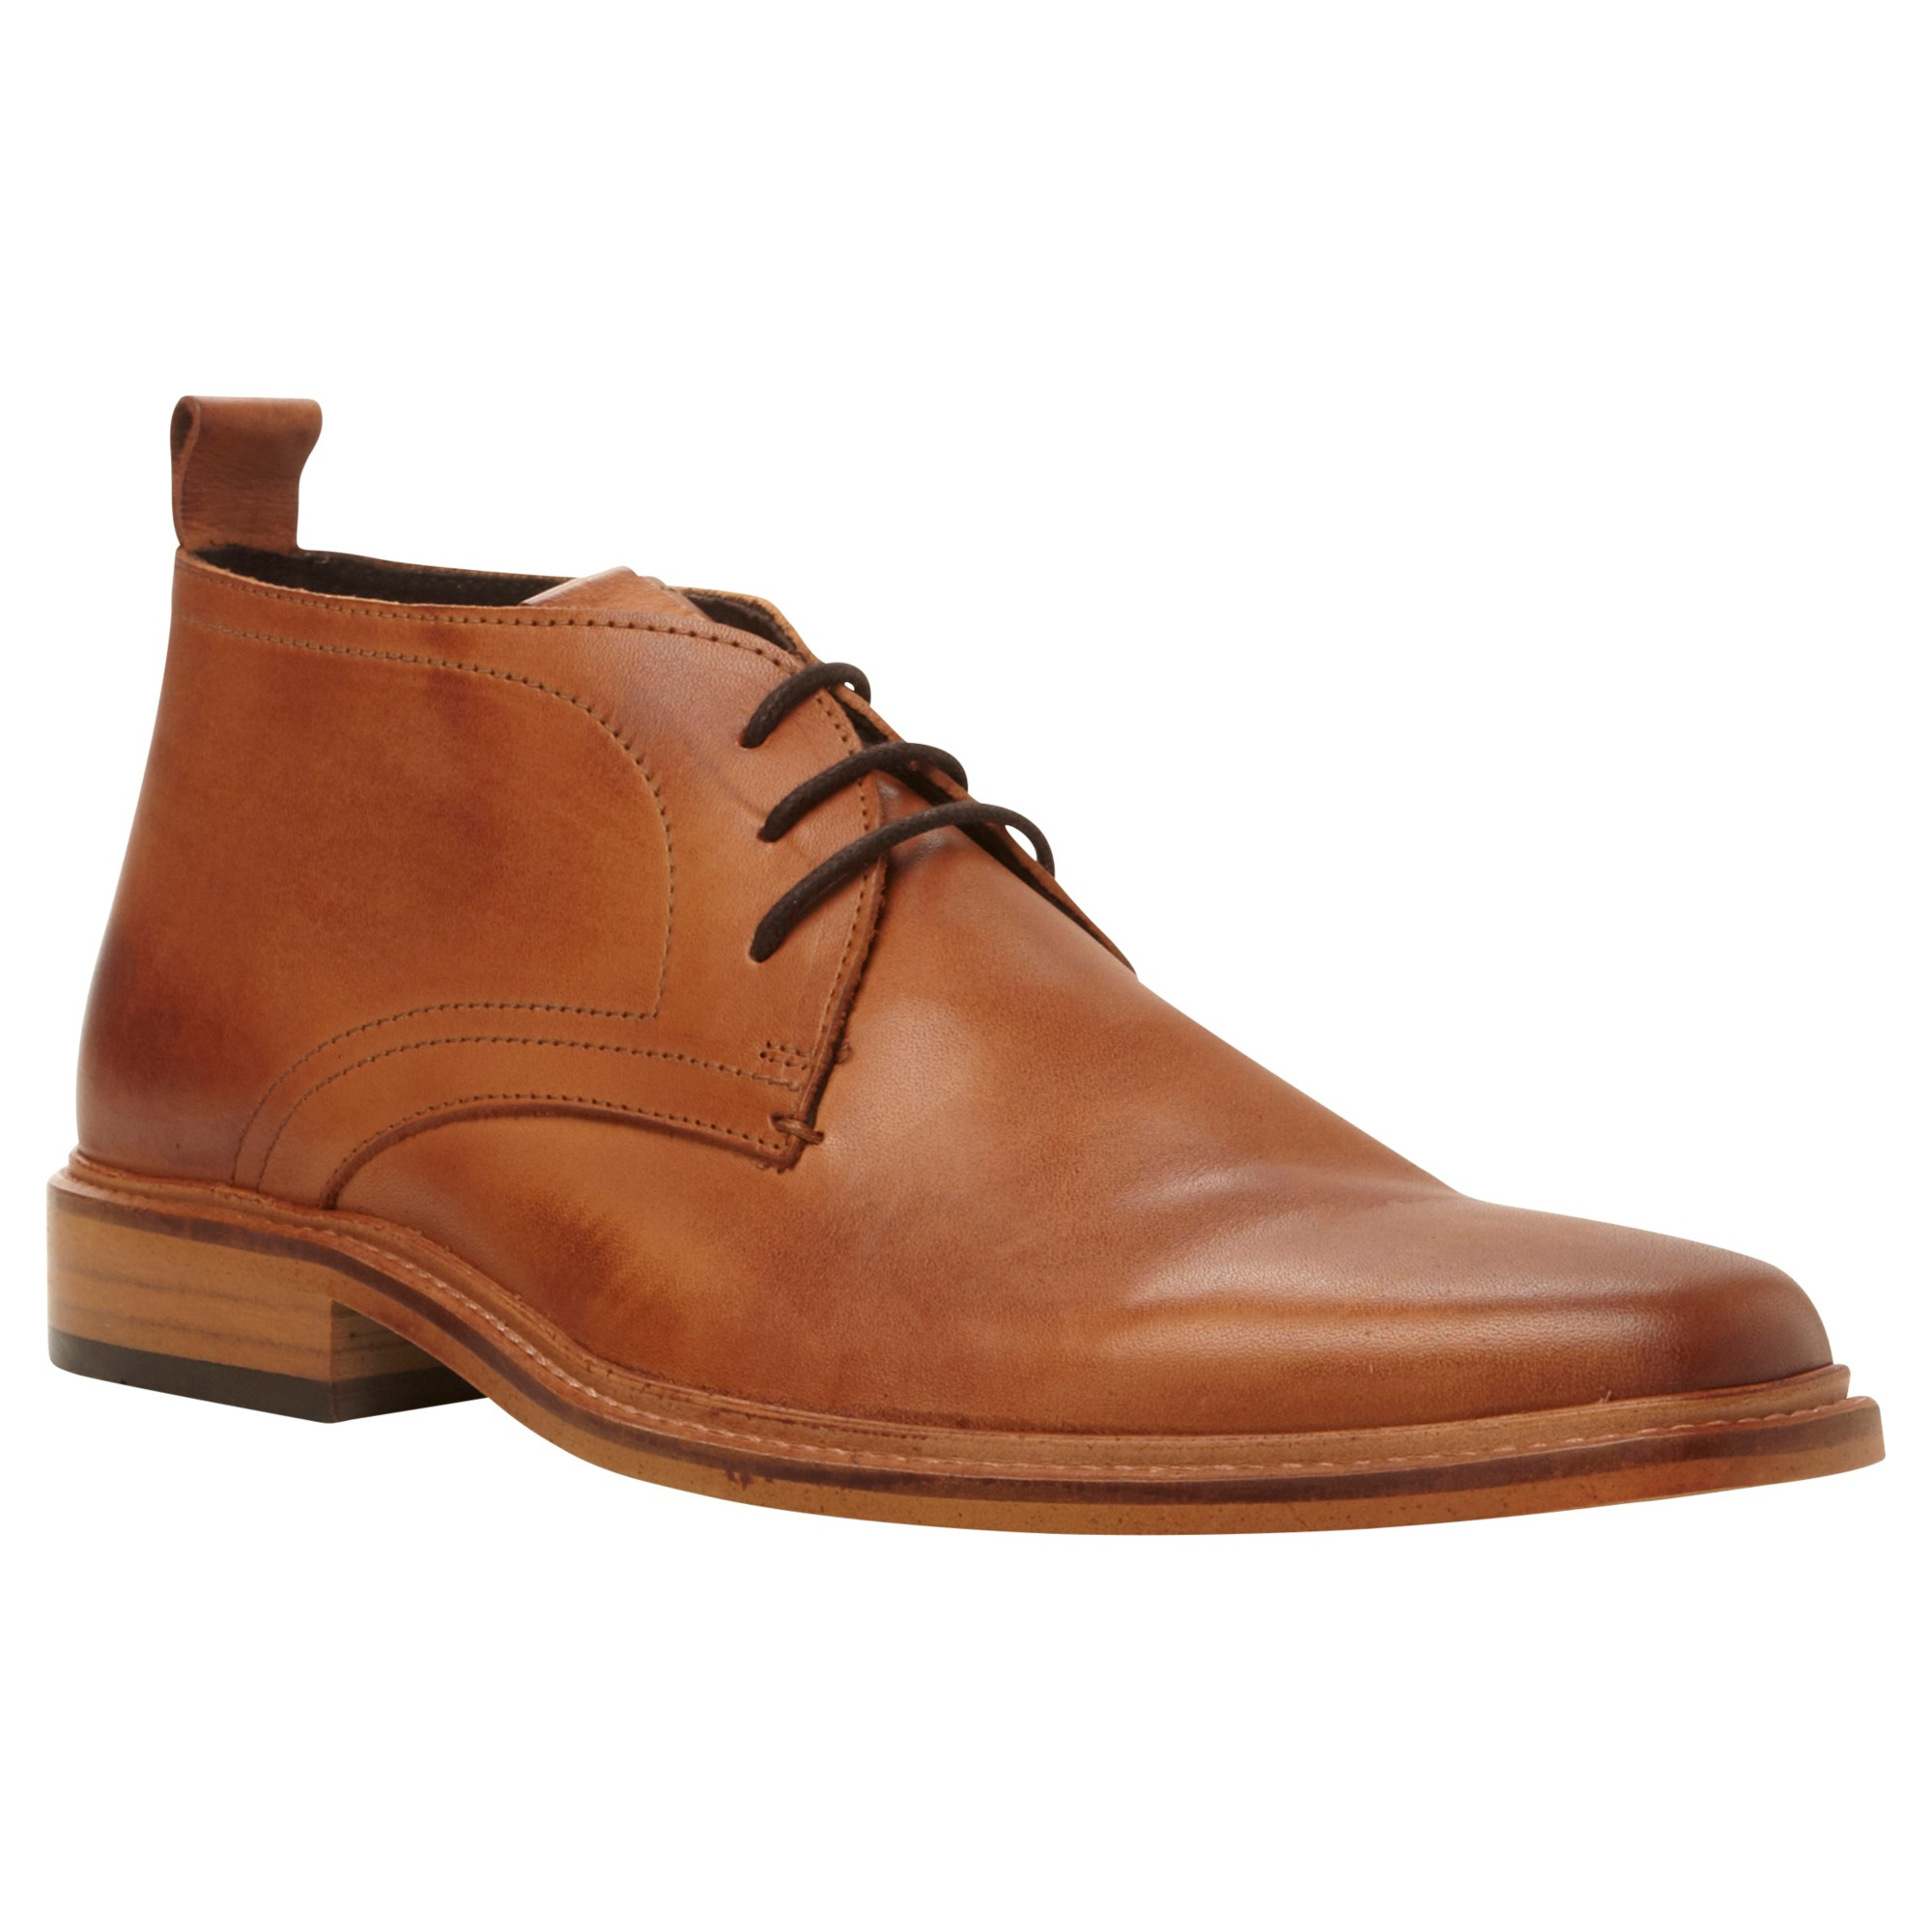 Dune Montenegro Leather Lace-up Boots in Tan (Brown) for Men - Lyst